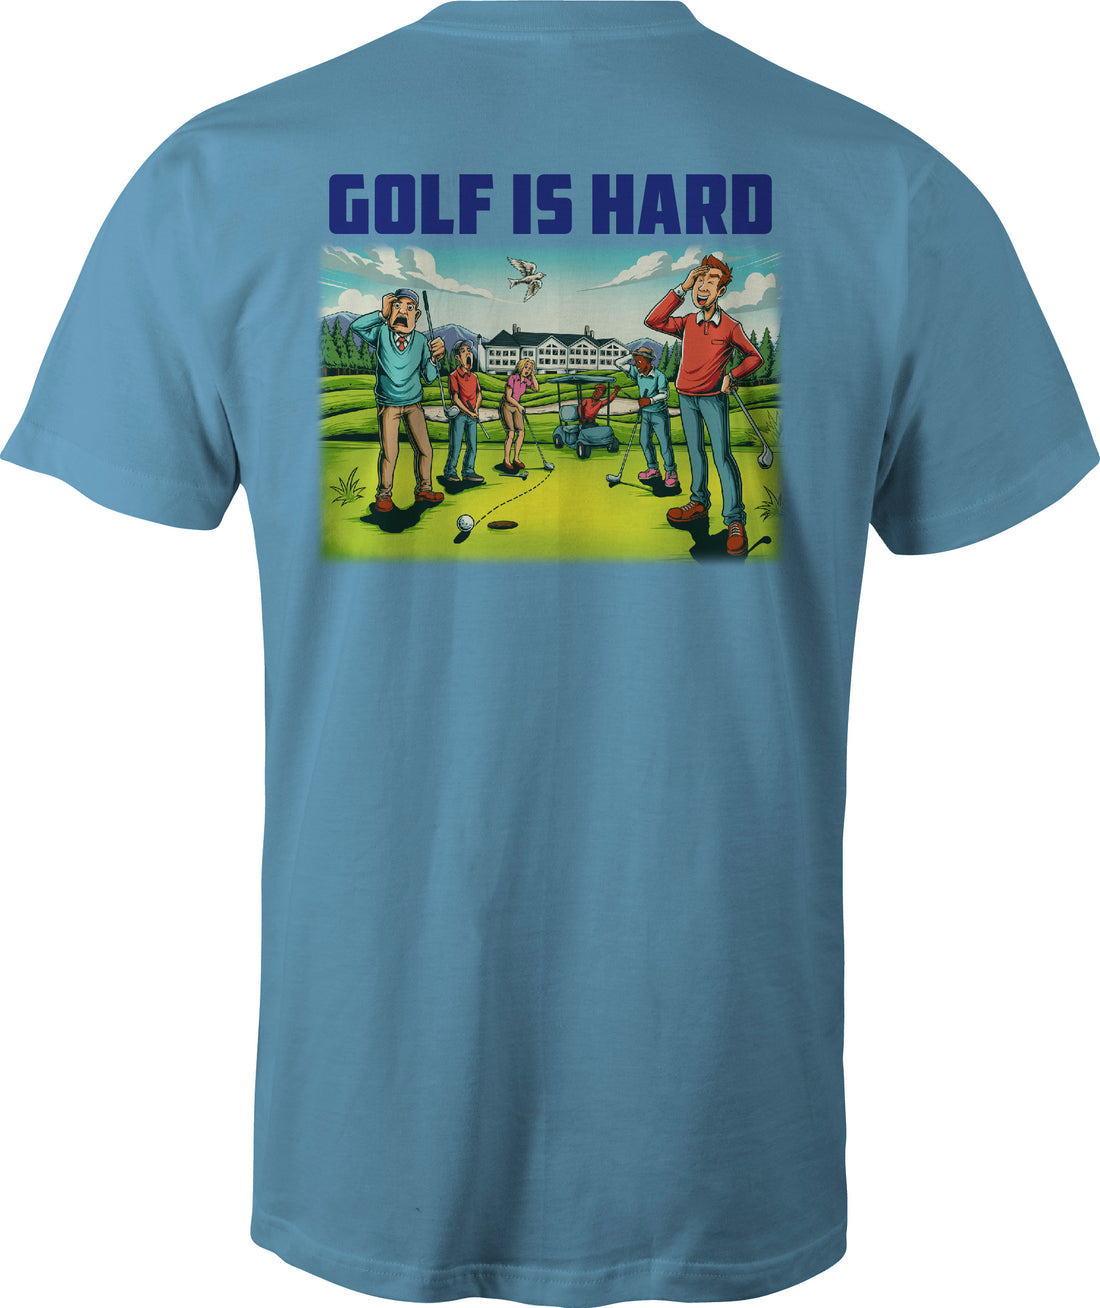 Golf Is Hard Group Play